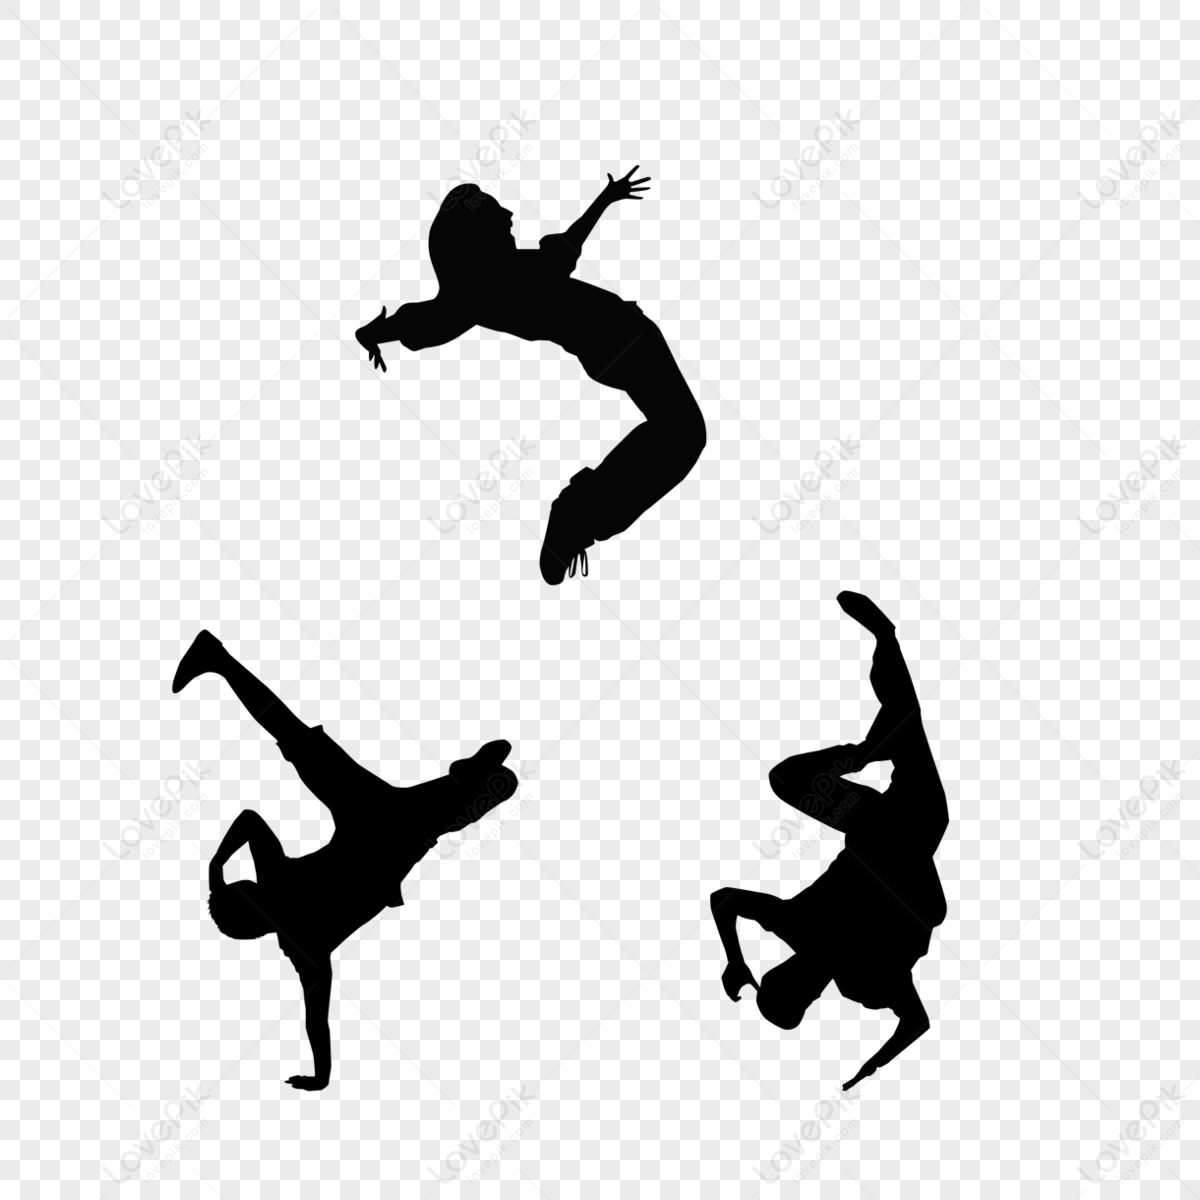 Black And White Silhouettes Of Dancing Figurescharacterscharacter Free Png And Clipart Image